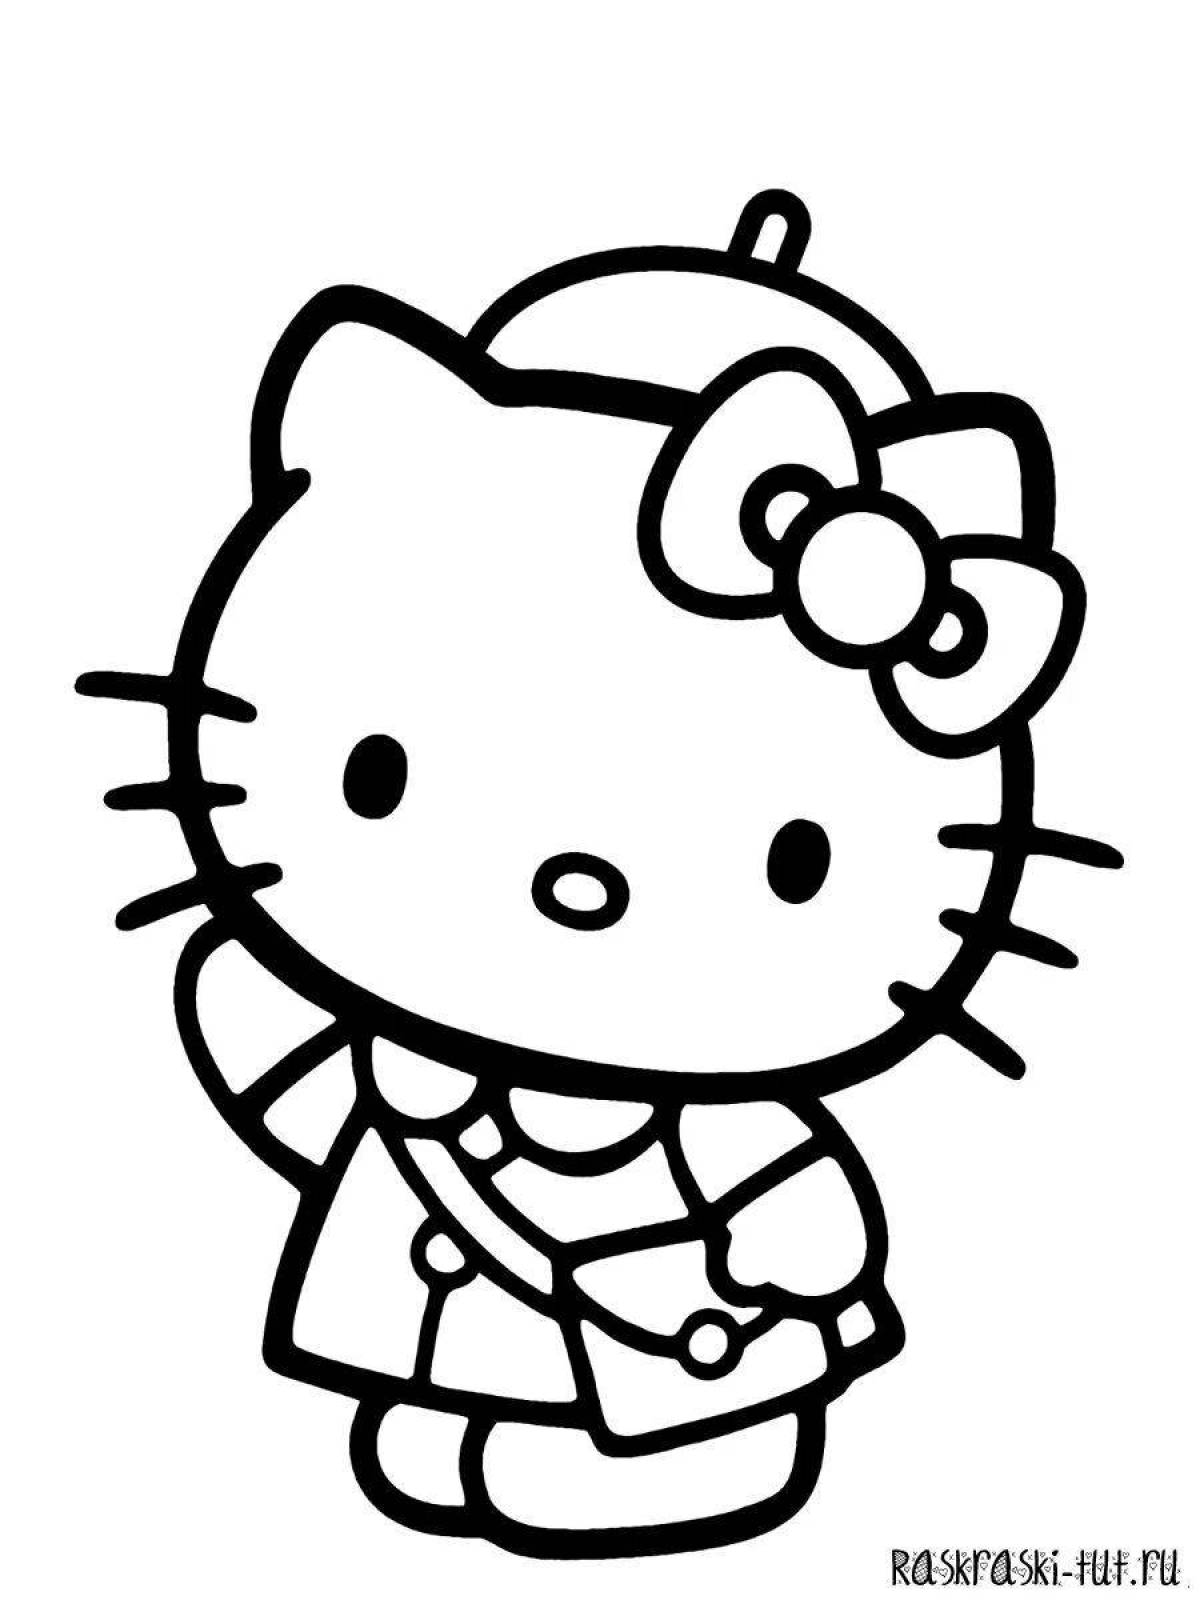 With hello kitty small #4